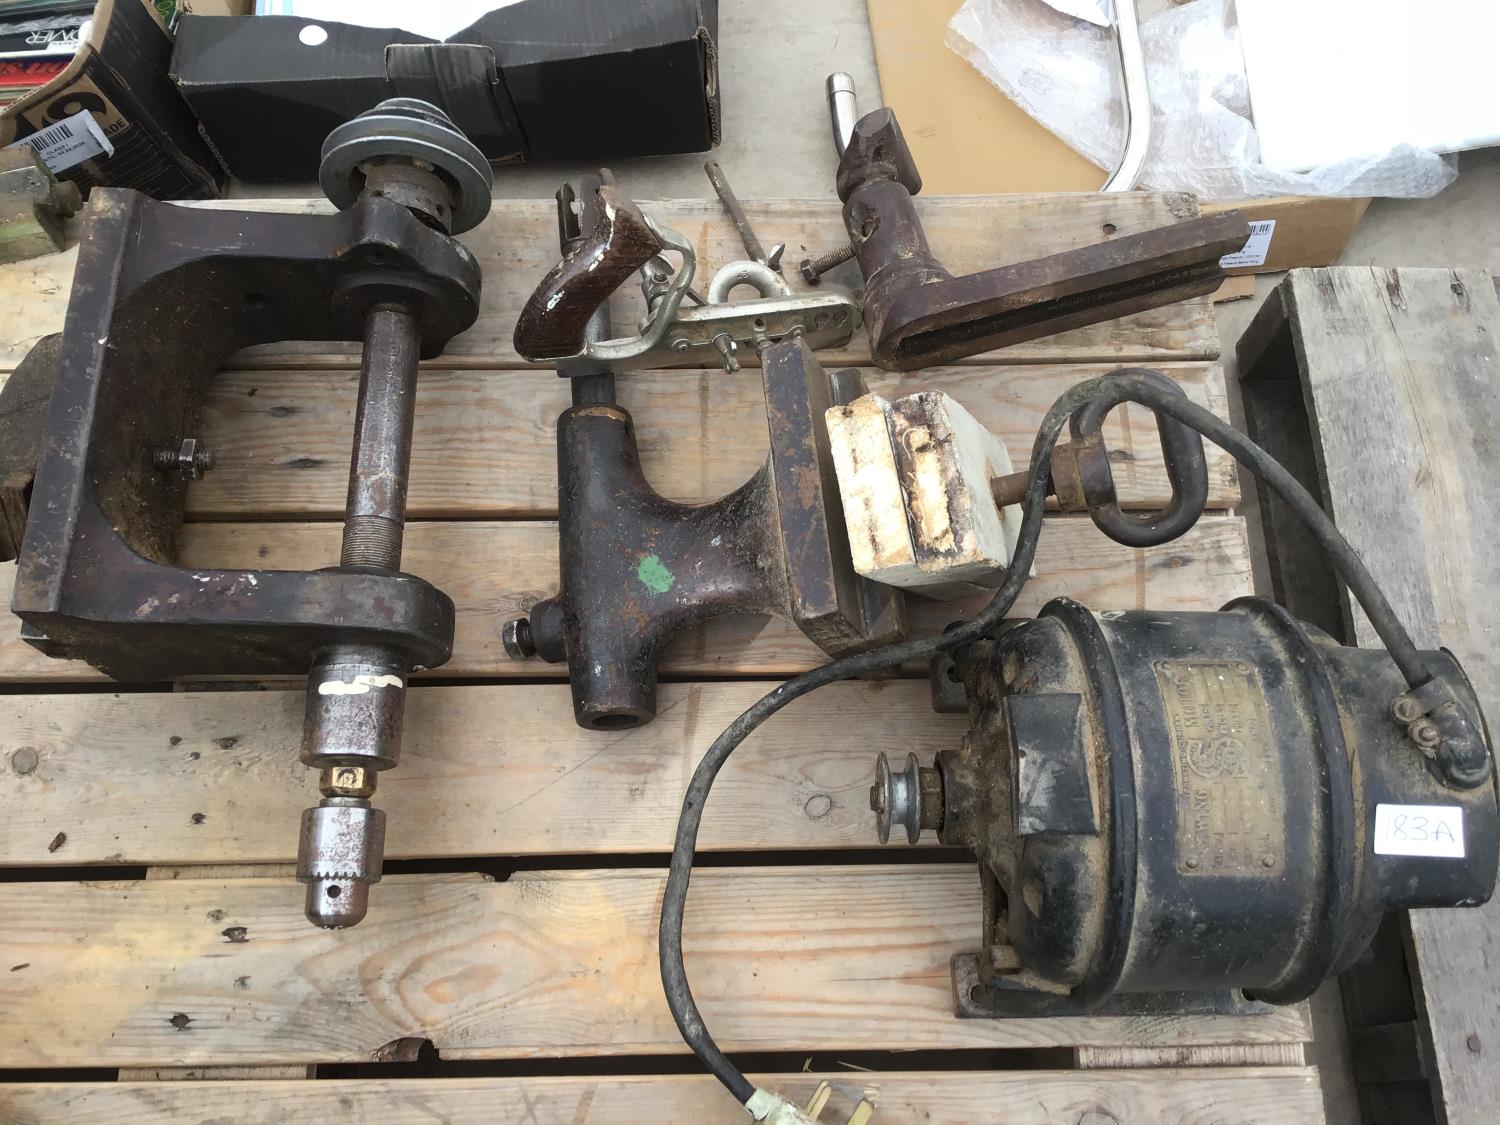 VARIOUS ITEMS TO INCLUDE A SINGER SEWING MACHINE MOTOR, DRILL AND OTHER HEAVY DUTY ATTACHMENTS - Image 2 of 4